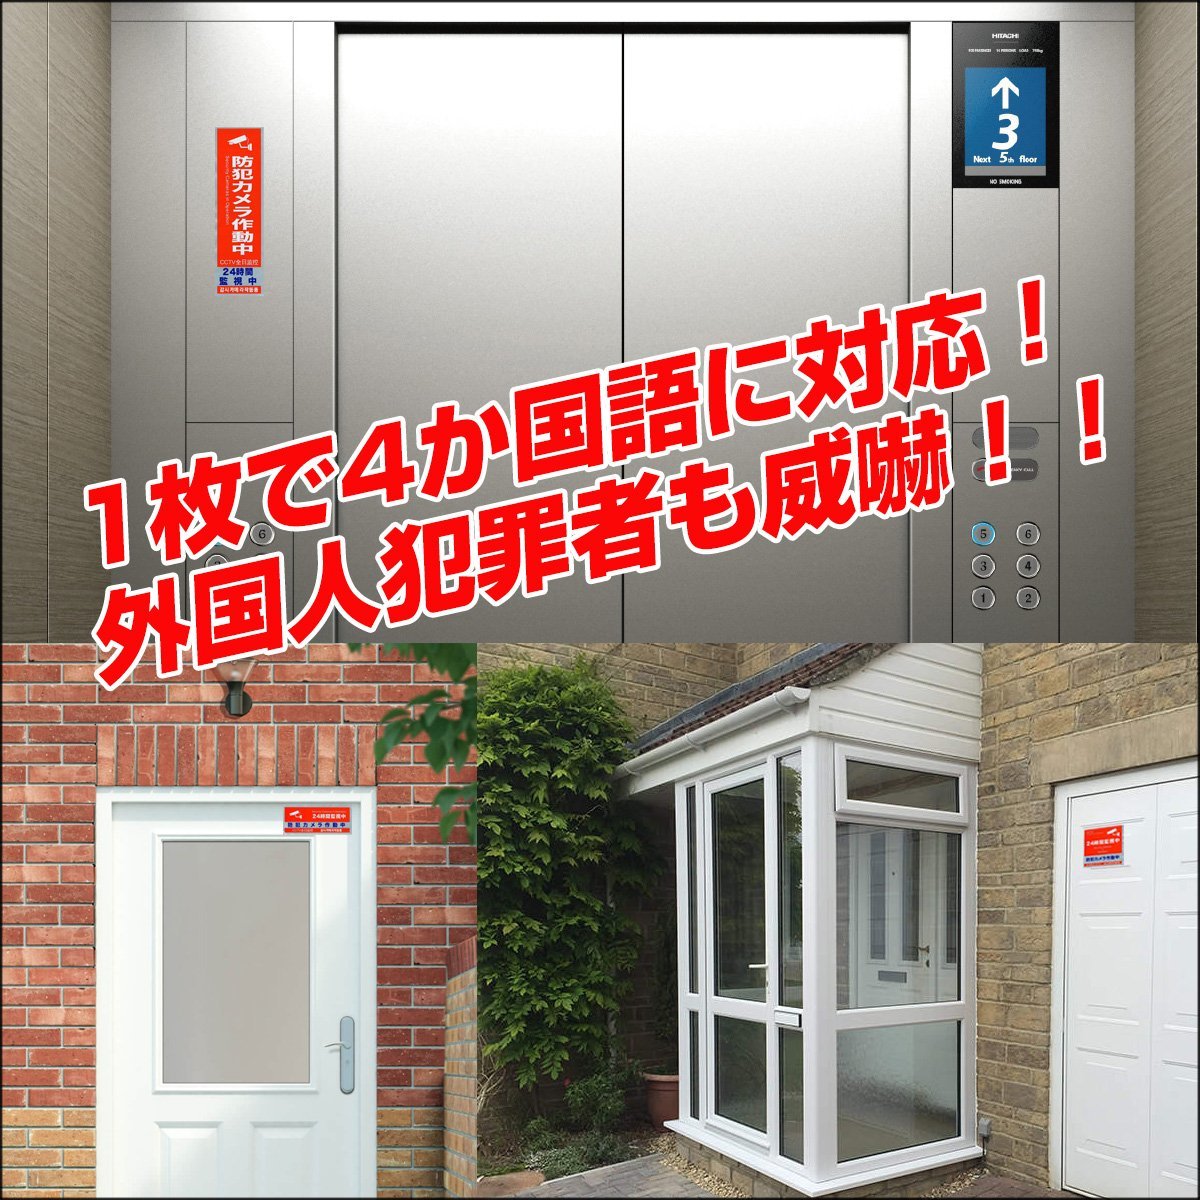  free shipping crime prevention sticker security camera operation middle sticker red 2 sheets set security sticker crime prevention measures store home garage /20